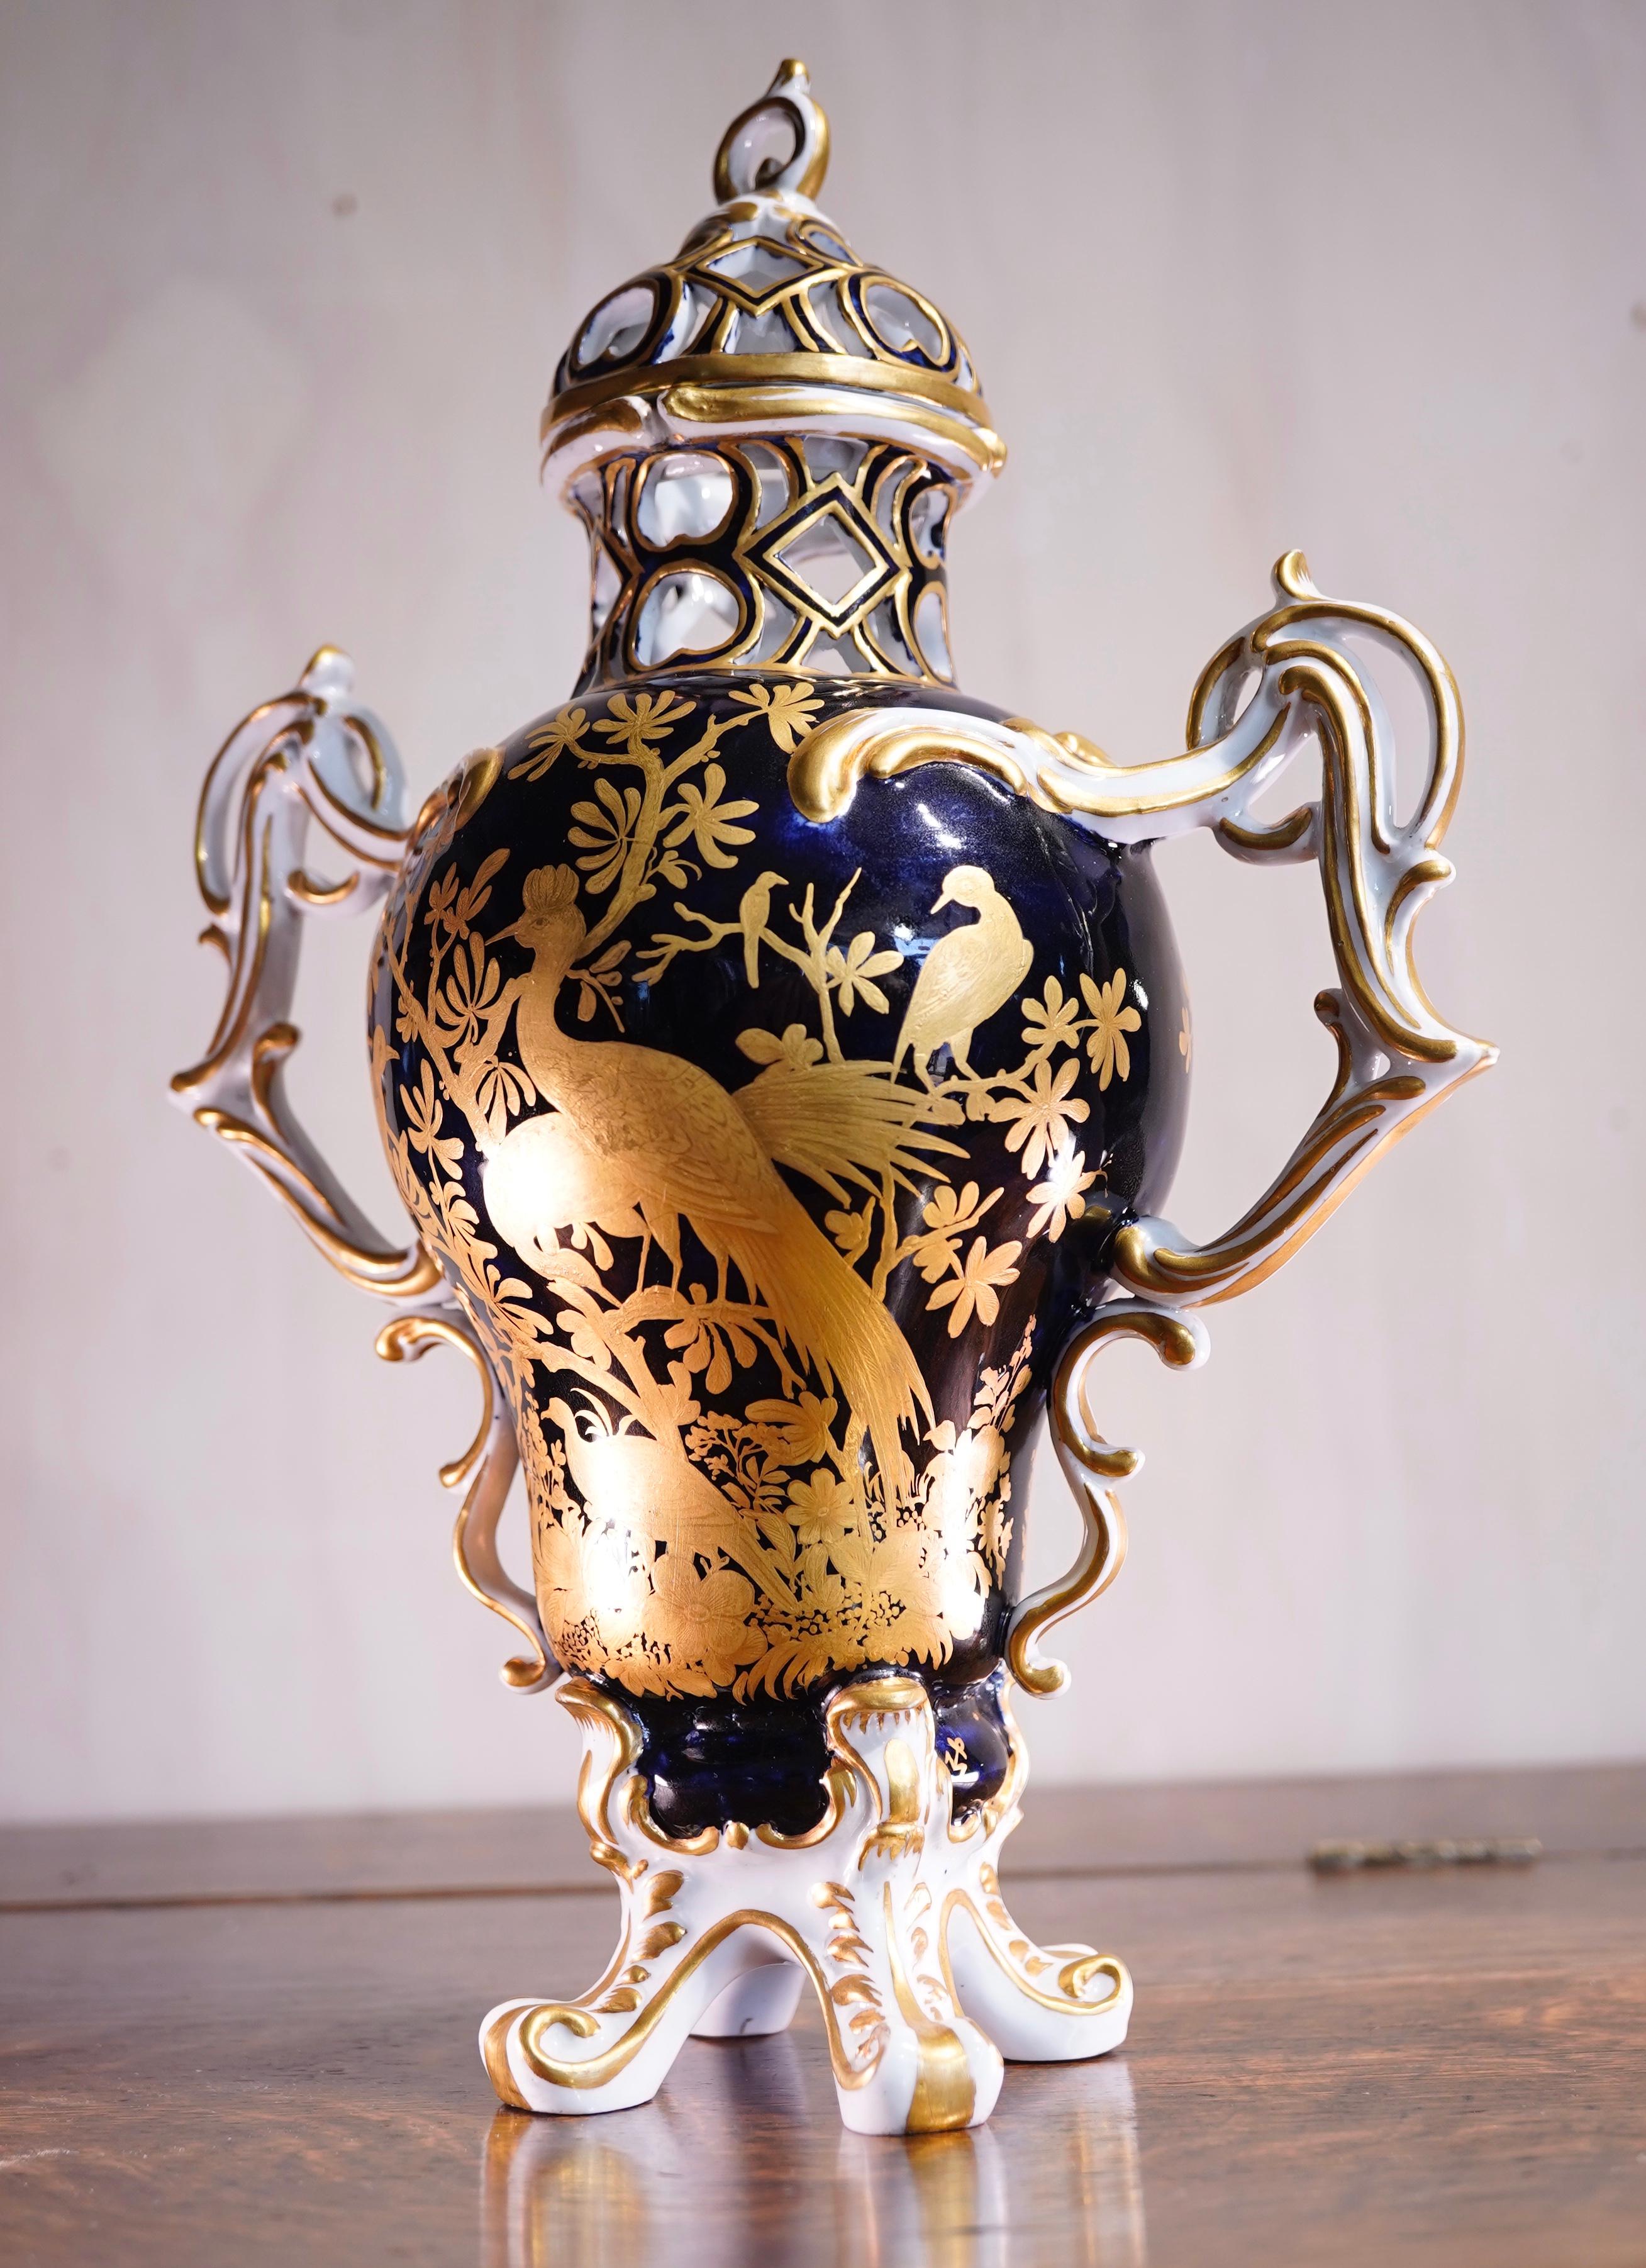 Chelsea Gold Anchor Vase, 'Dudley' Type, circa 1765 In Good Condition For Sale In Geelong, Victoria